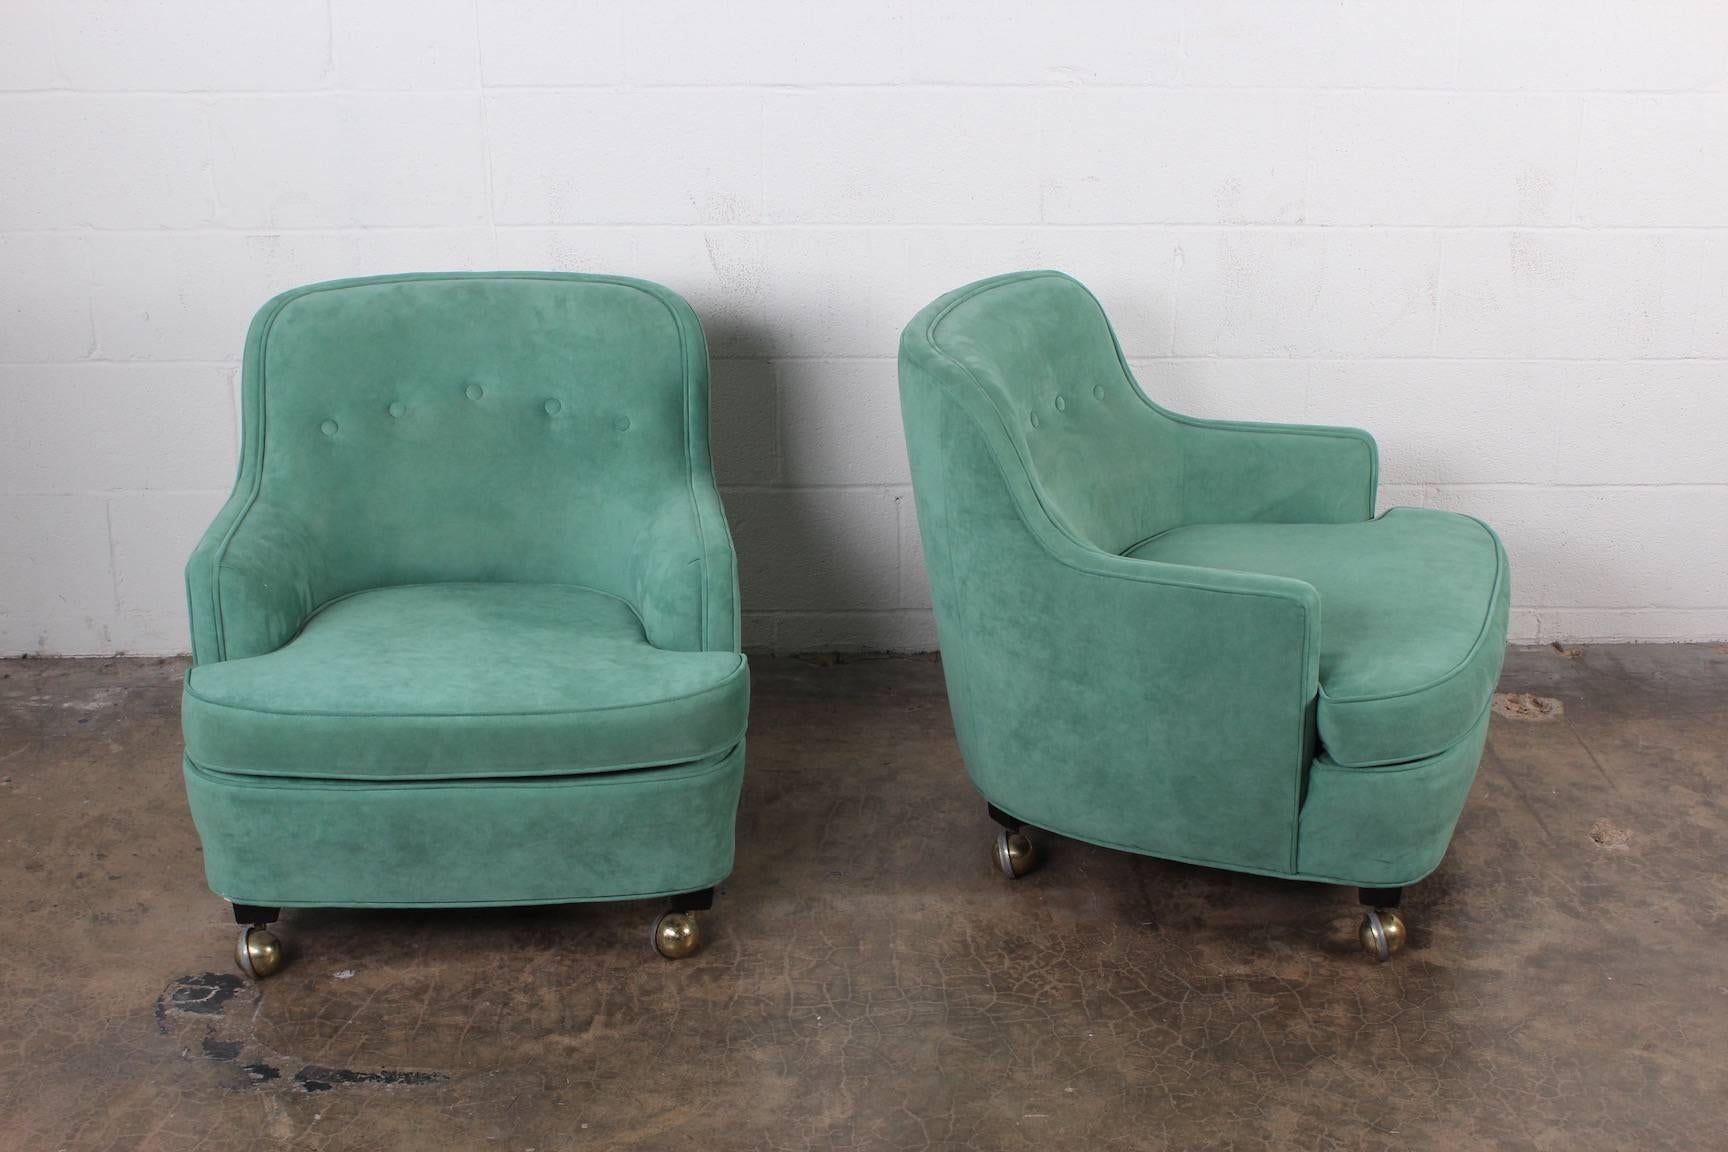 A pair of small-scale lounge chairs on casters. Designed by Edward Wormley for Dunbar.